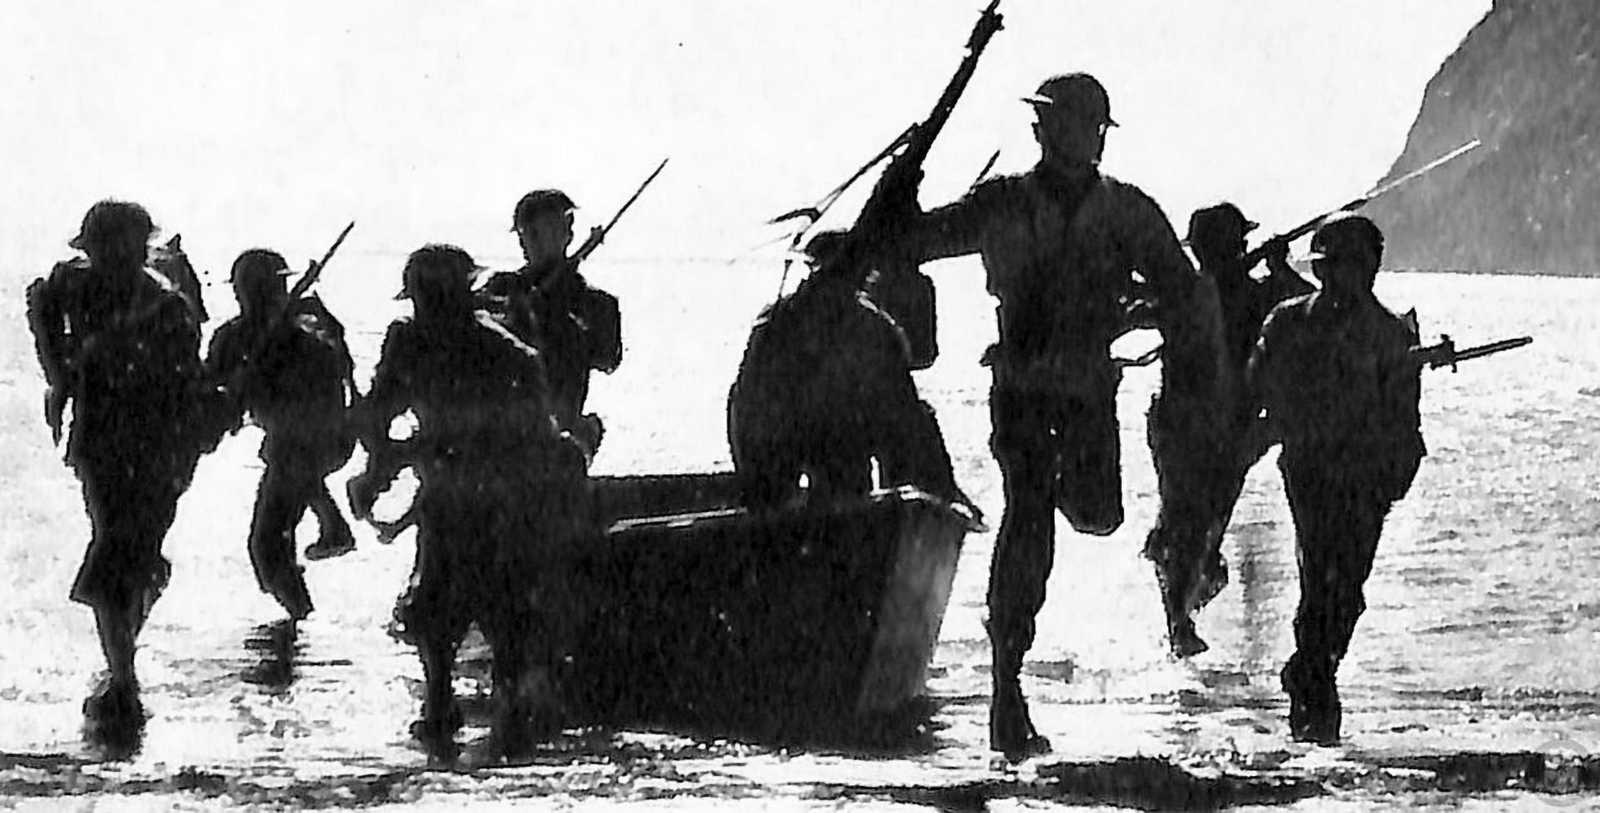 Photo of soldiers disembarking from a small landing craft, running with rifles up the shore onto the beach, silhouetted against the water and sky